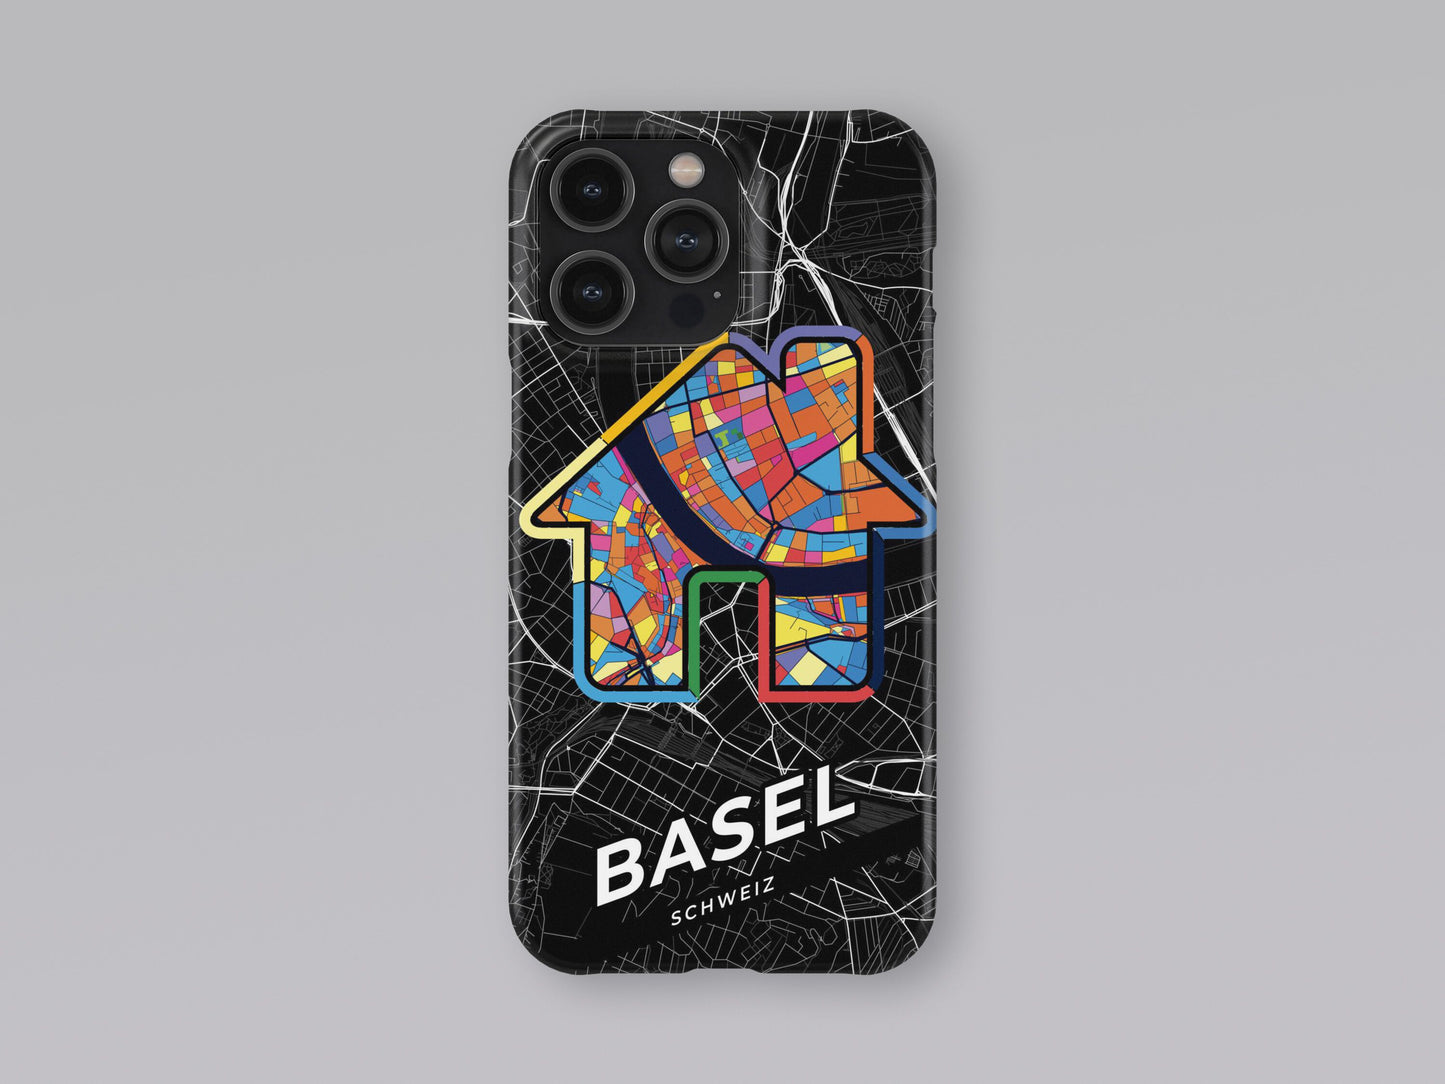 Basel Switzerland slim phone case with colorful icon. Birthday, wedding or housewarming gift. Couple match cases. 3